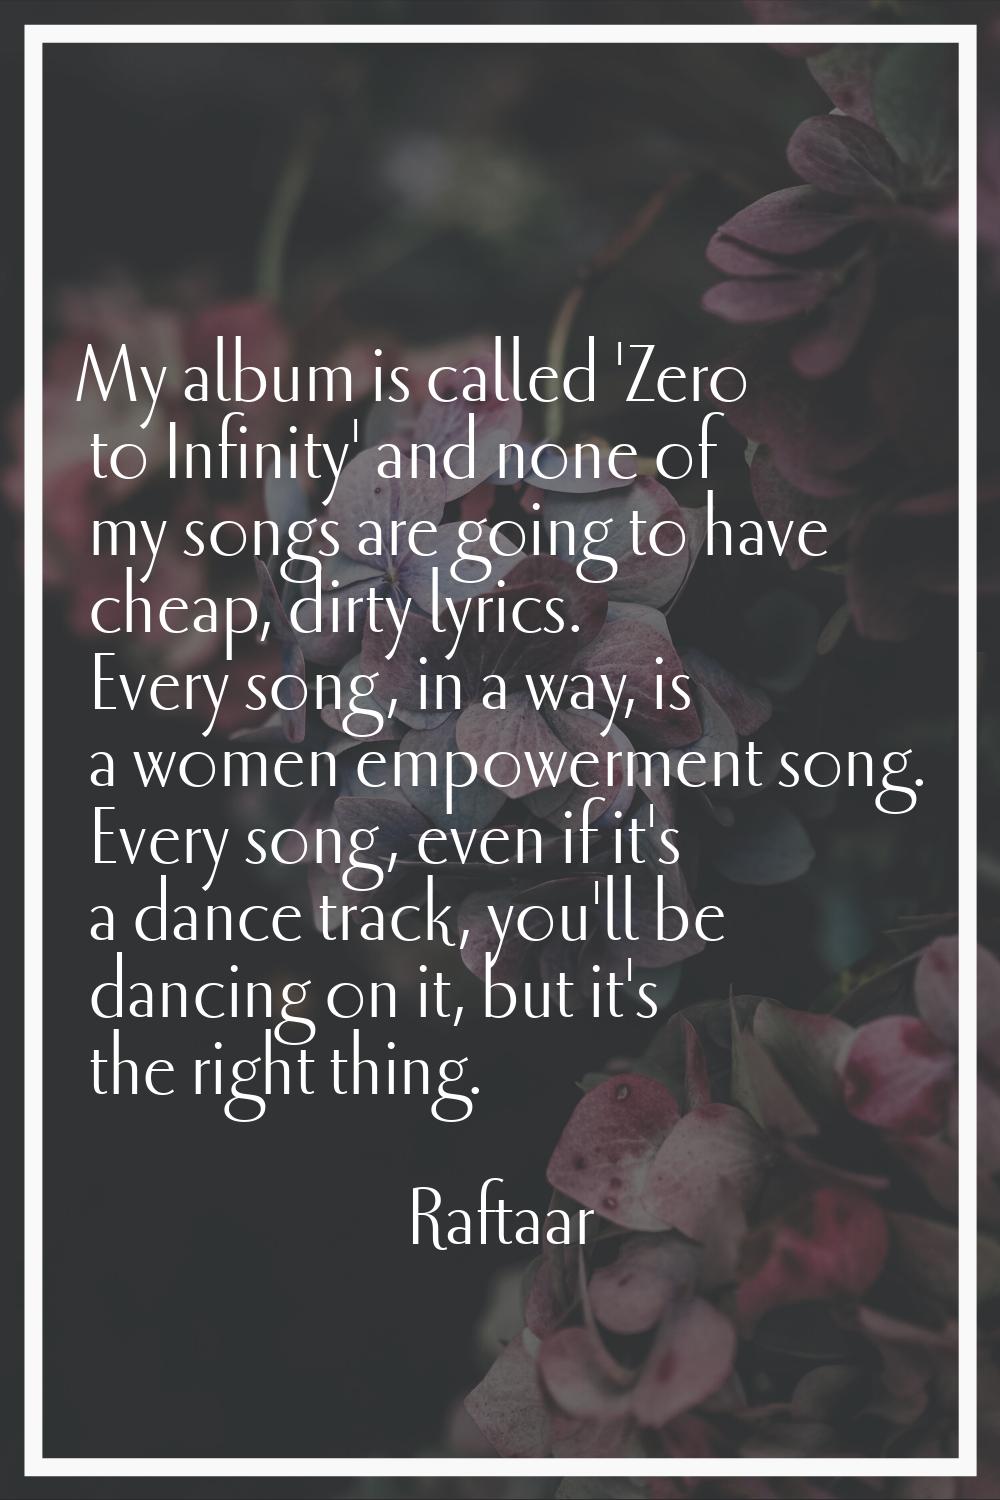 My album is called 'Zero to Infinity' and none of my songs are going to have cheap, dirty lyrics. E